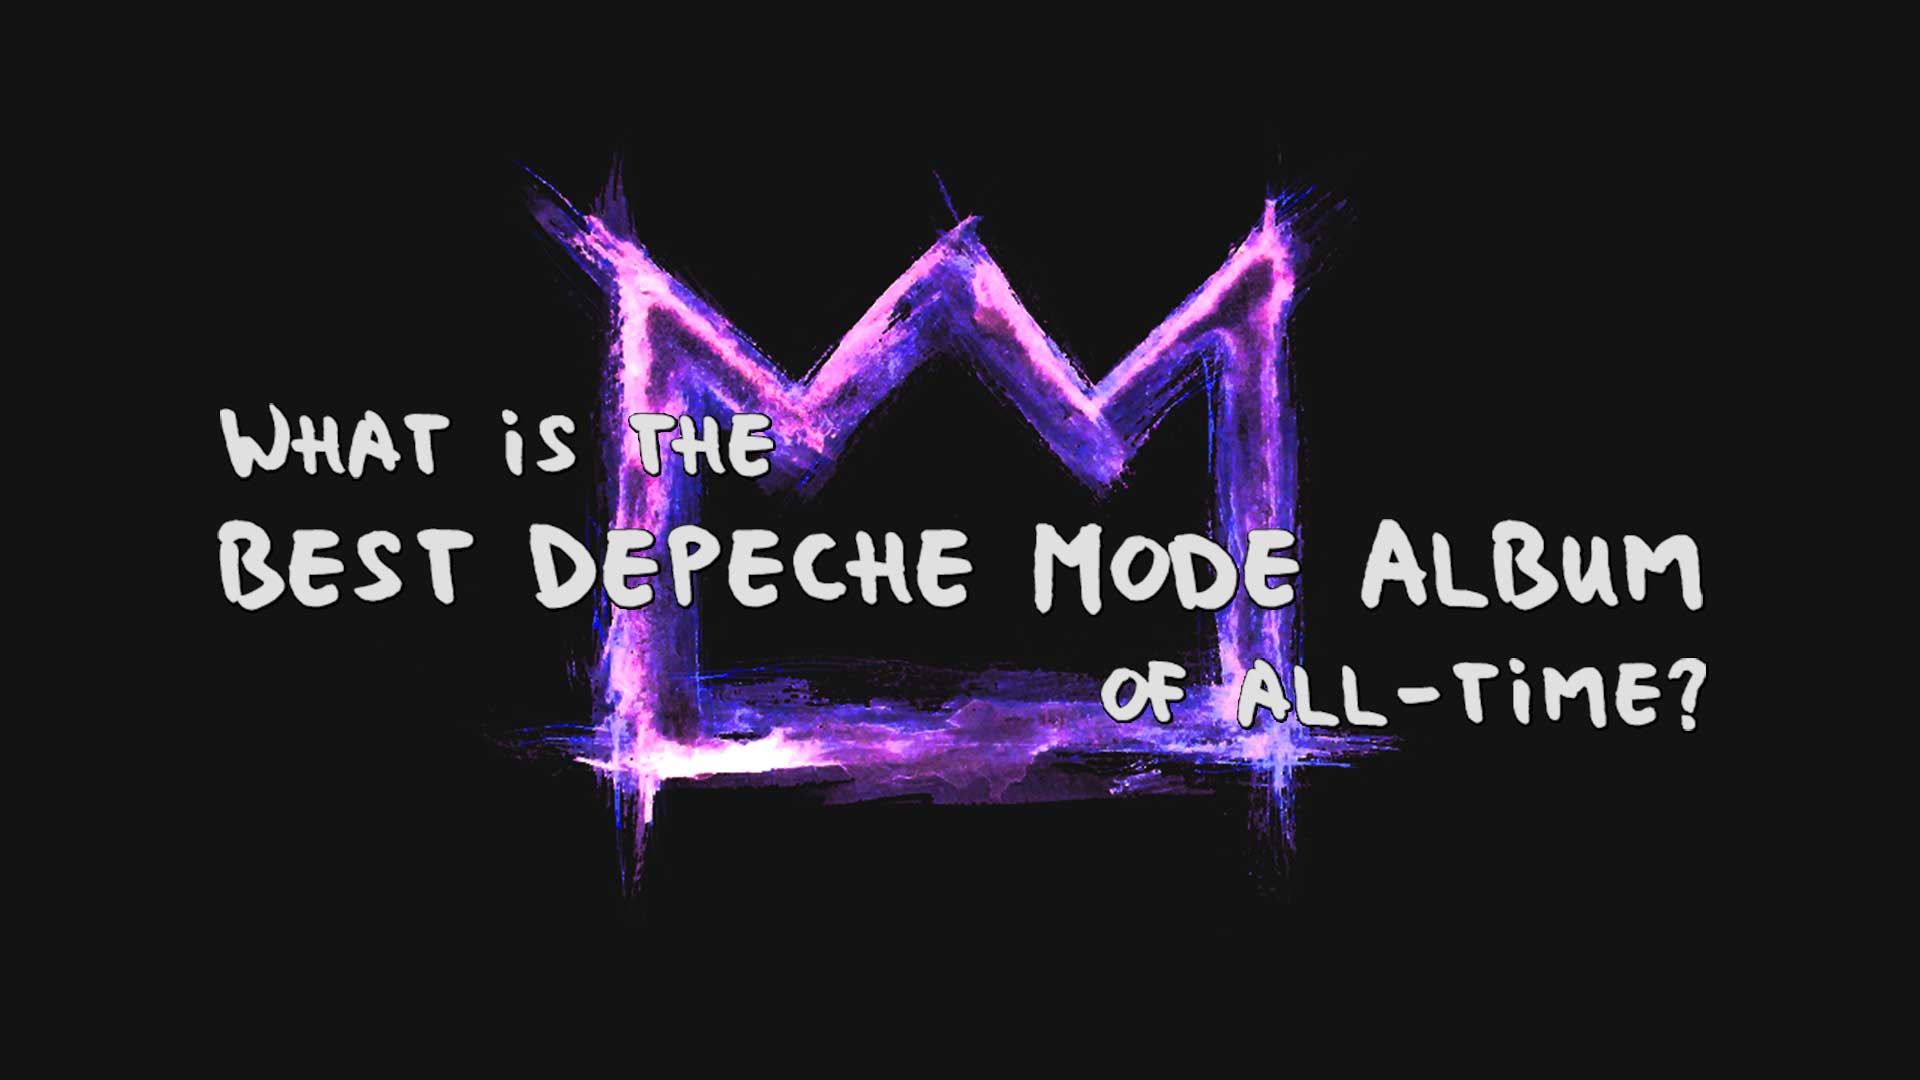 Welcome to my World Depeche Mode